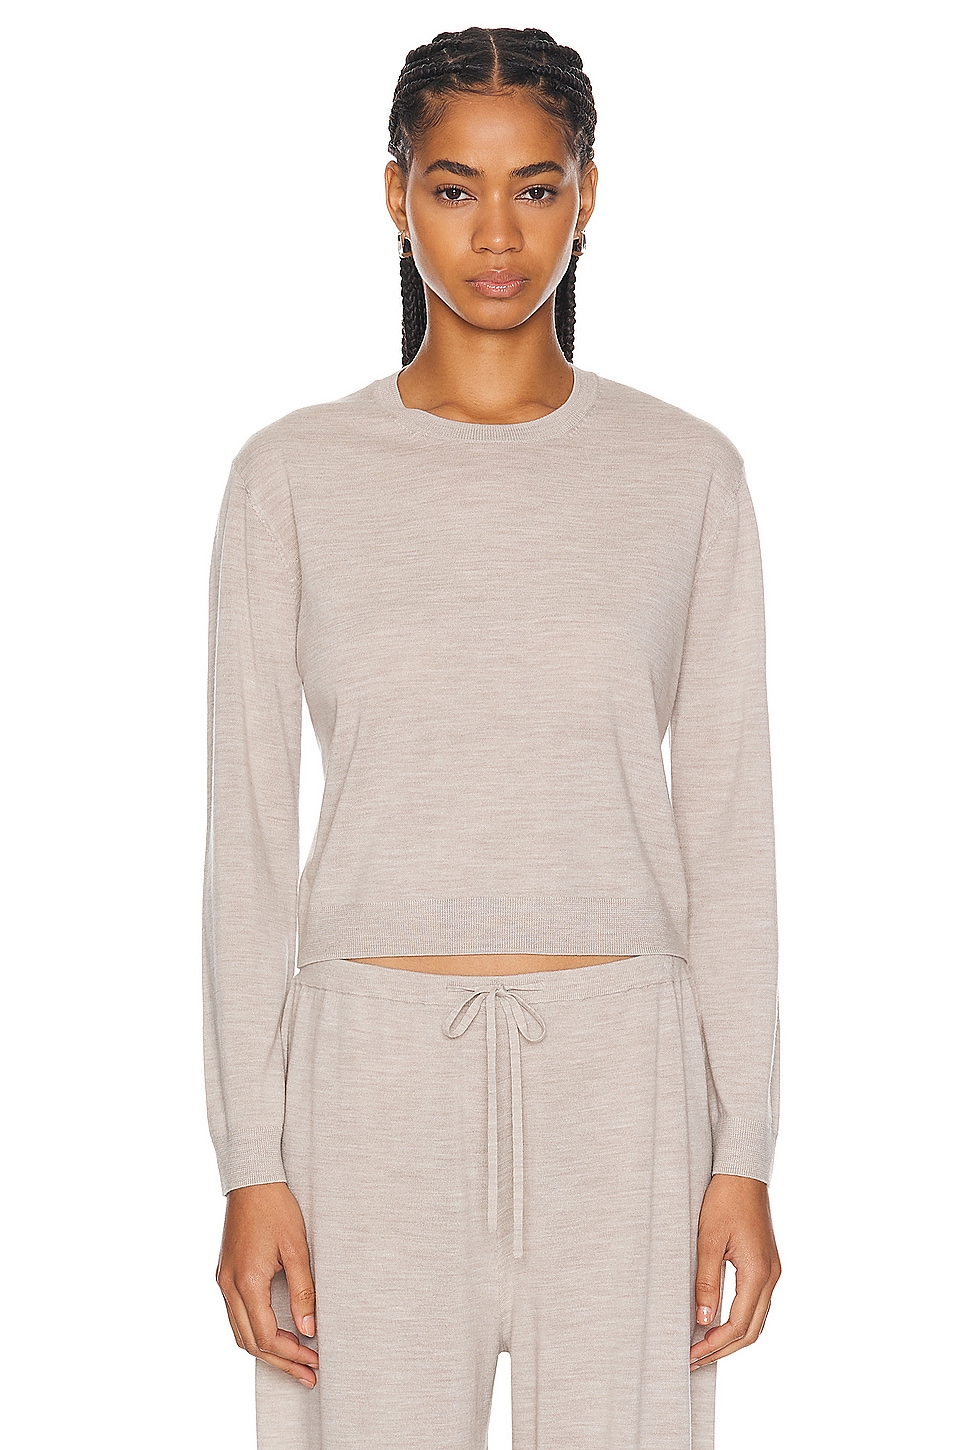 Image 1 of LESET James Classic Crew Sweater in Oatmeal